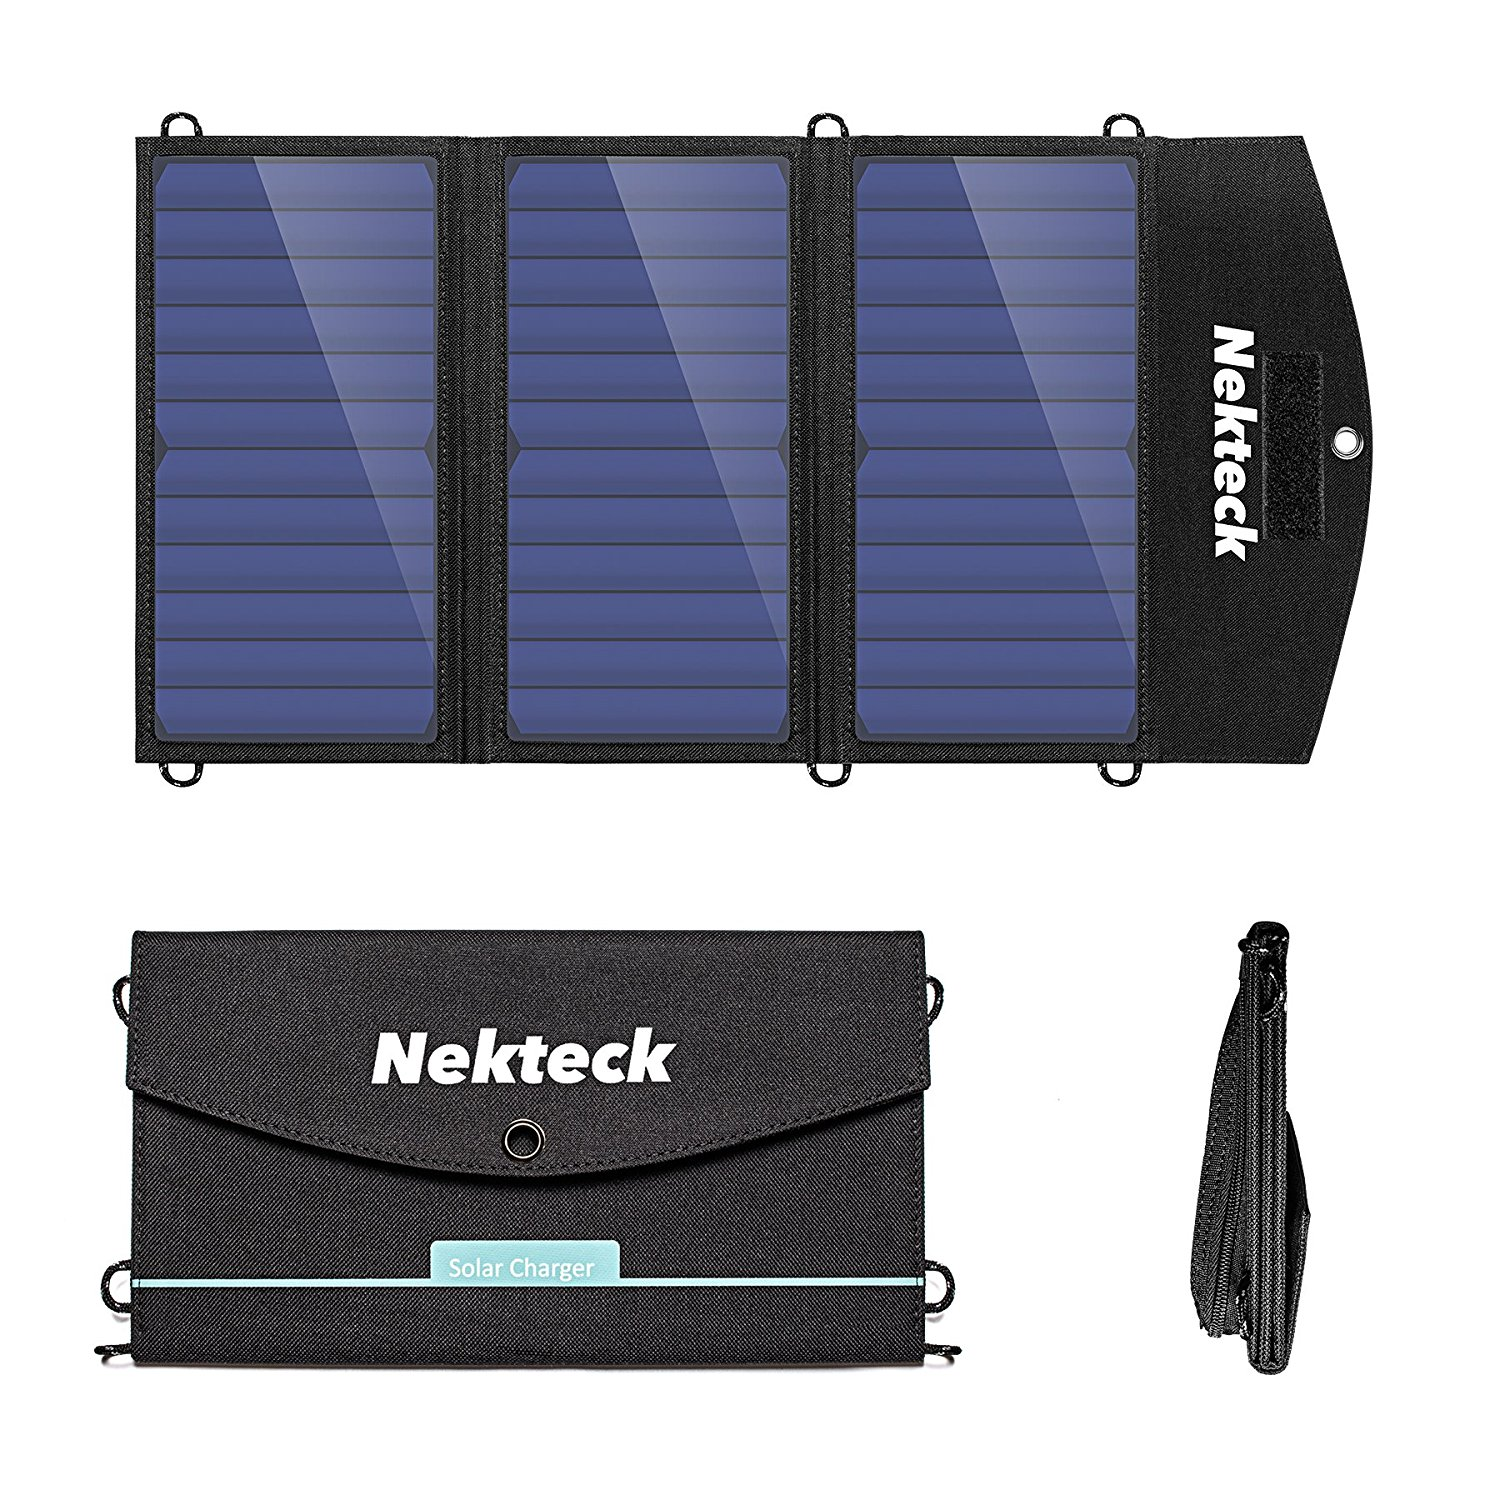 Solar Charger with 2-Port USB Charger $39.85!